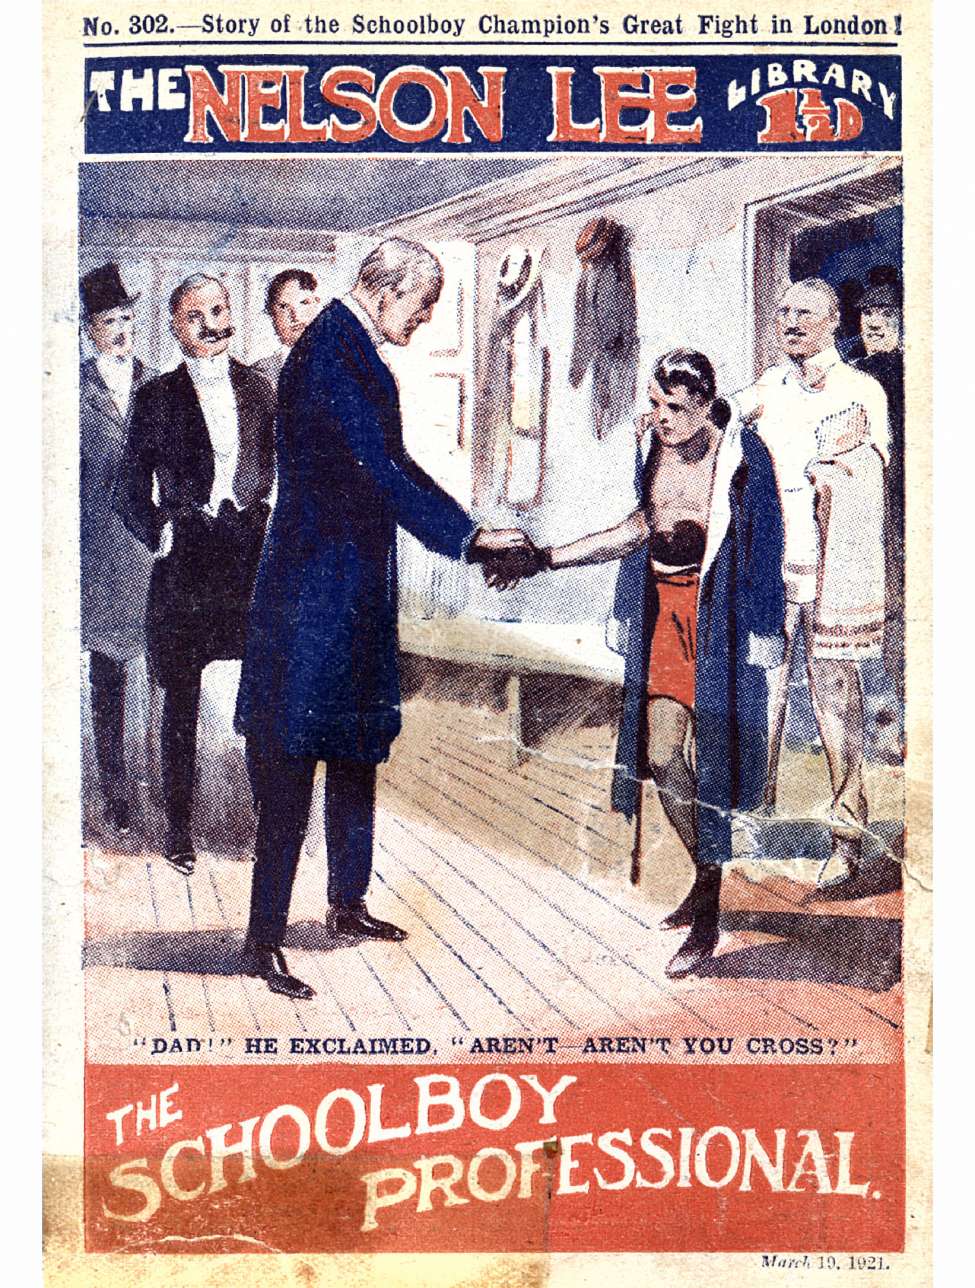 Book Cover For Nelson Lee Library s1 302 - The Schoolboy Professional